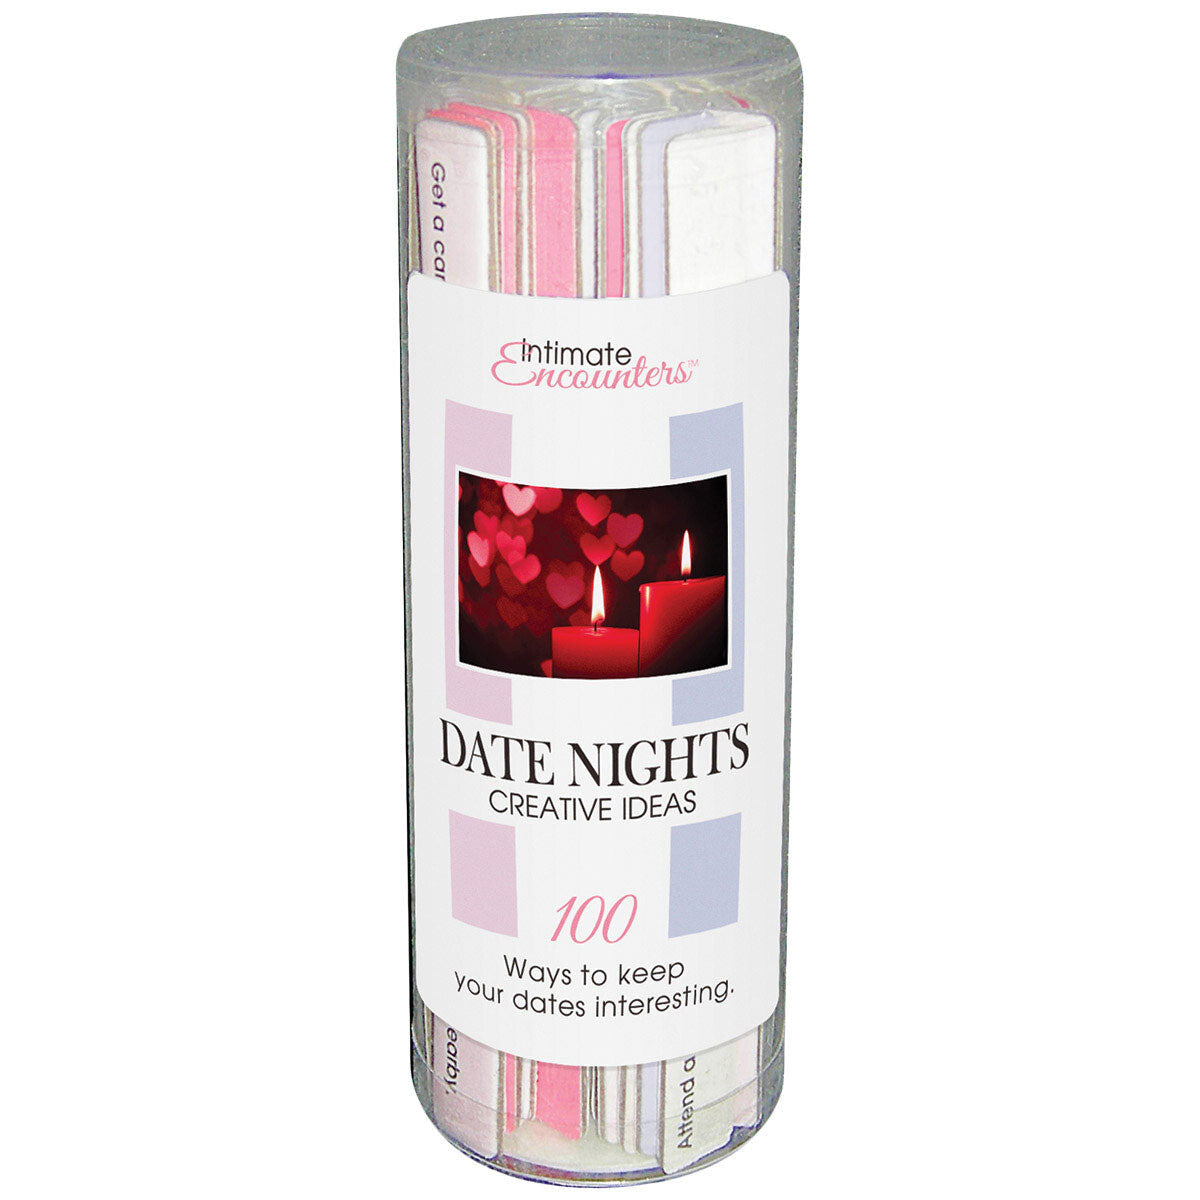 Date Nights Creative Ideas Intimates Adult Boutique